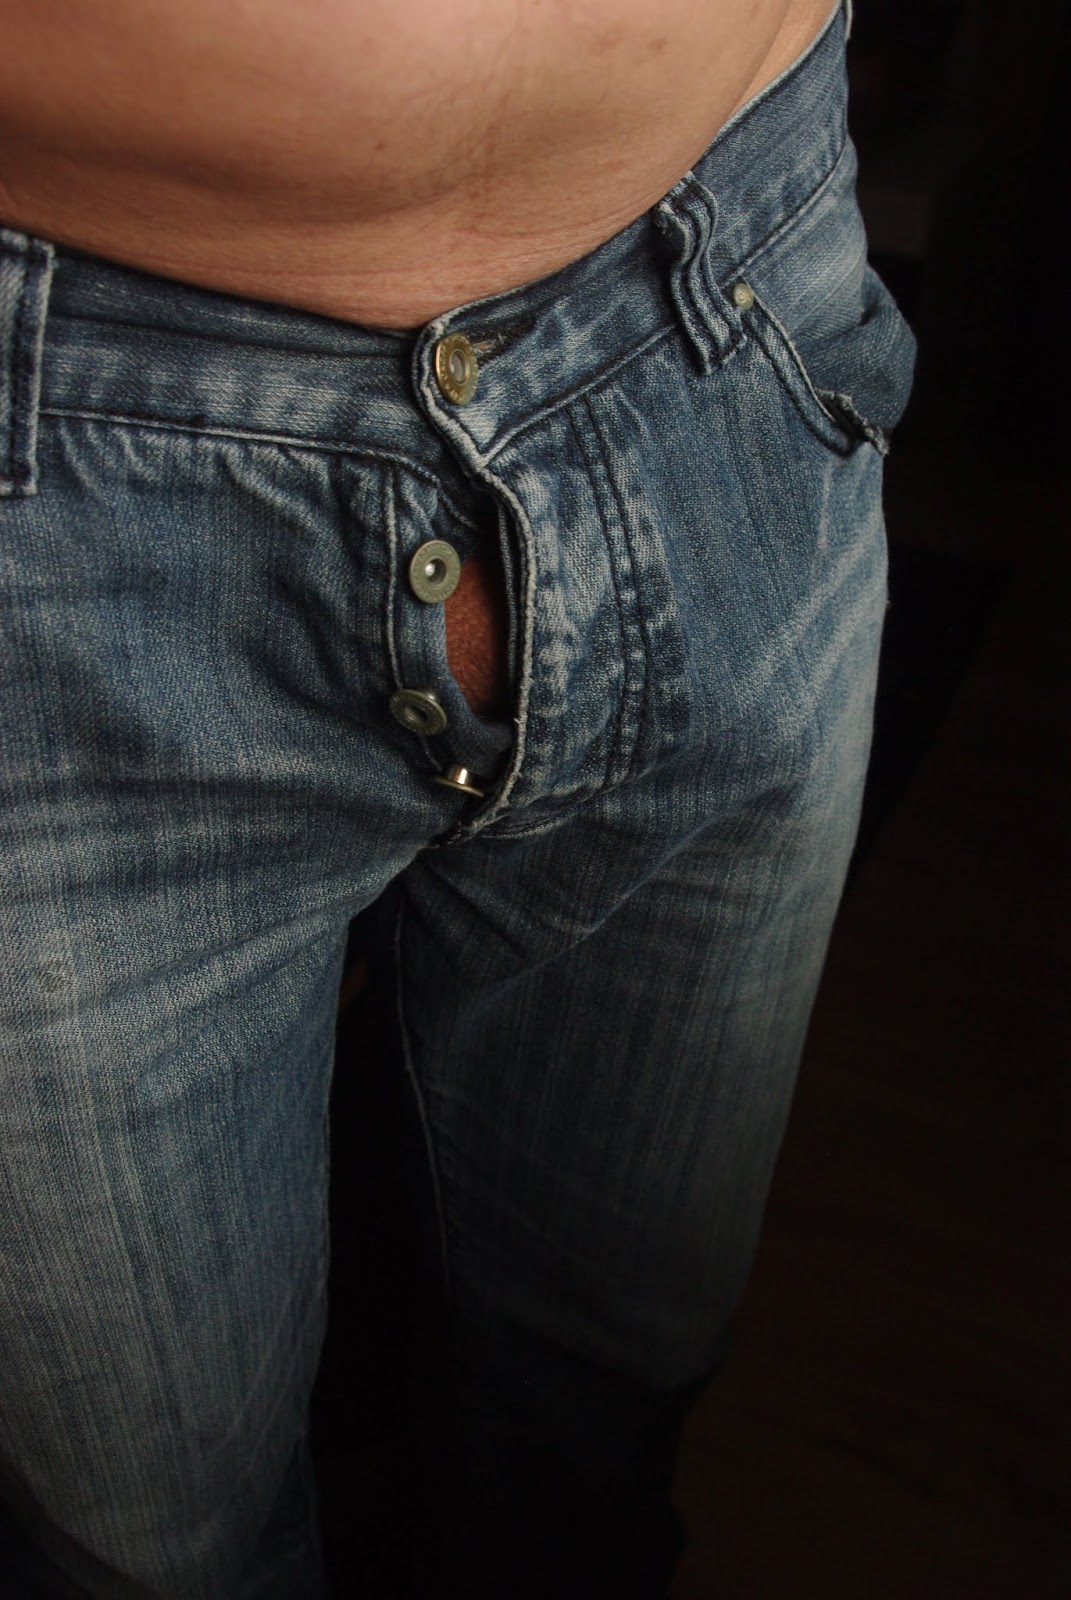 Thirsty cocks in jeans 1.